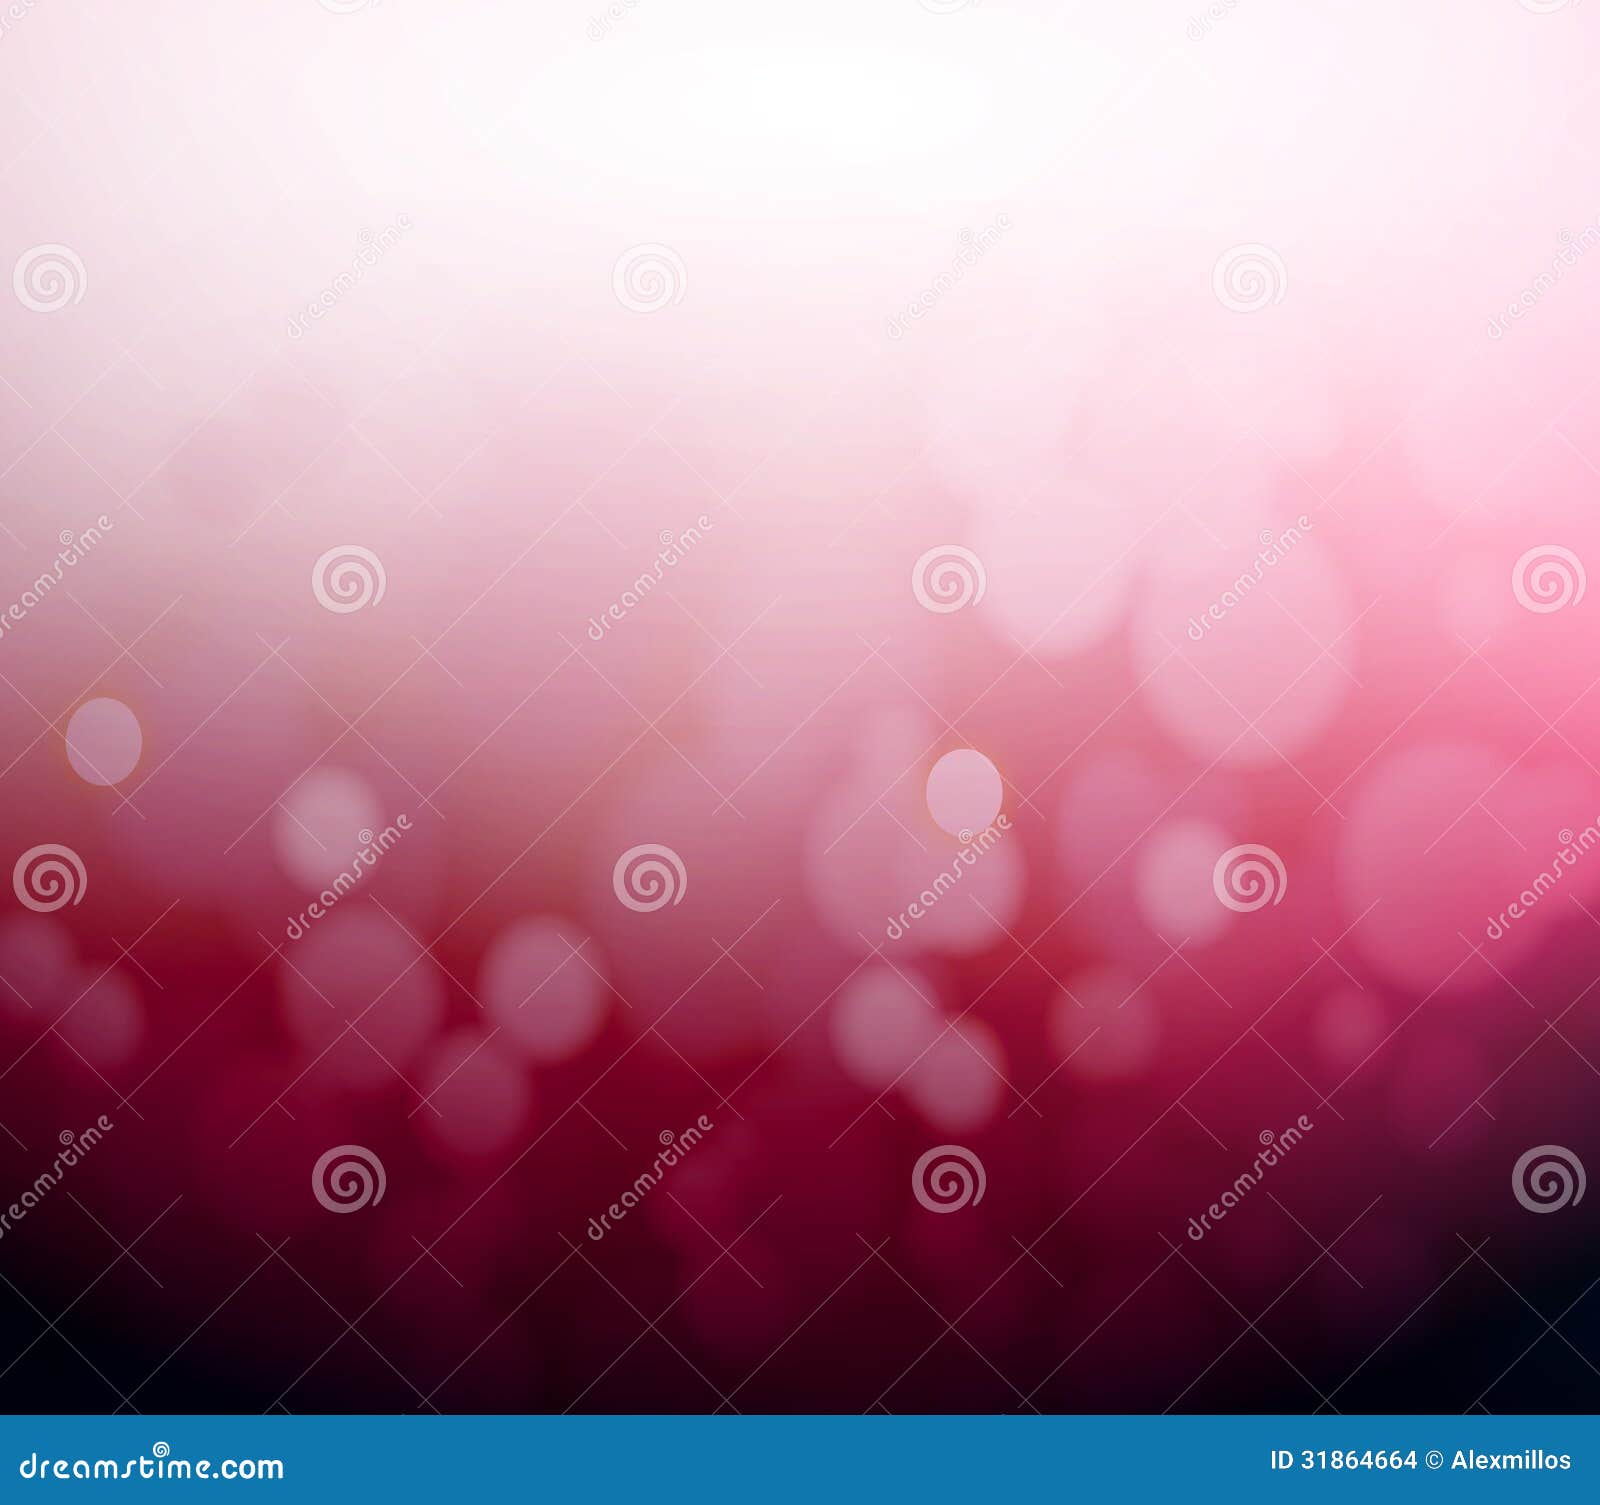 Burgundy Bokeh Abstract Light Background. Stock Images - Image: 31864664